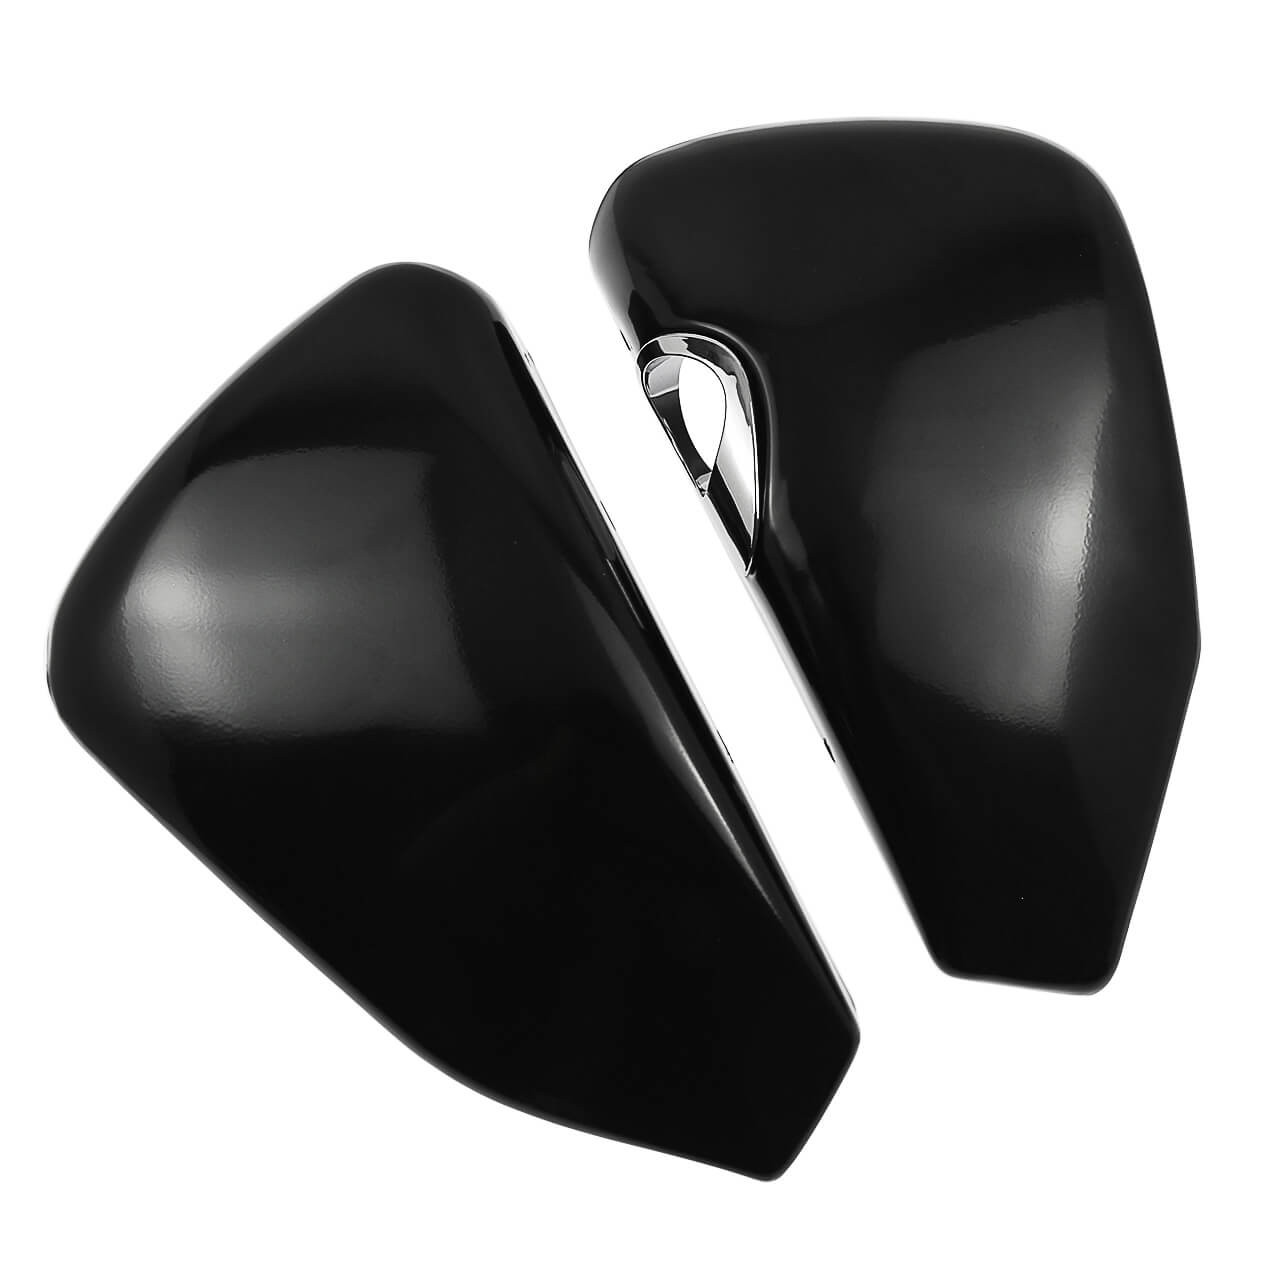 CR010804-mactions-battery-cover-side-panel-protections-harley-black